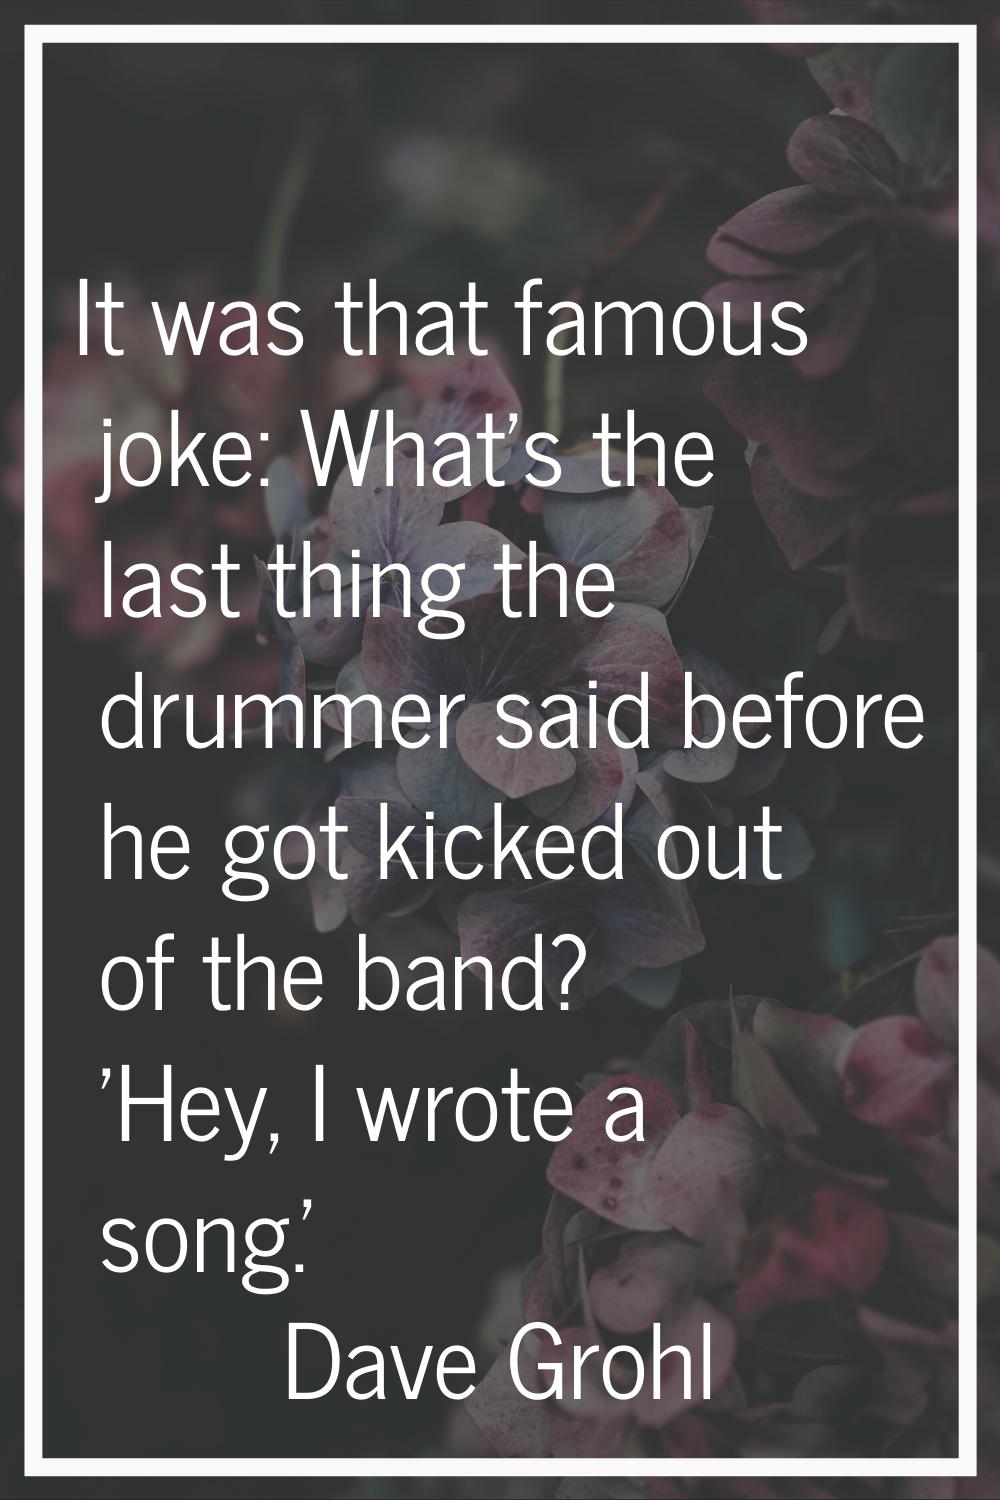 It was that famous joke: What's the last thing the drummer said before he got kicked out of the ban